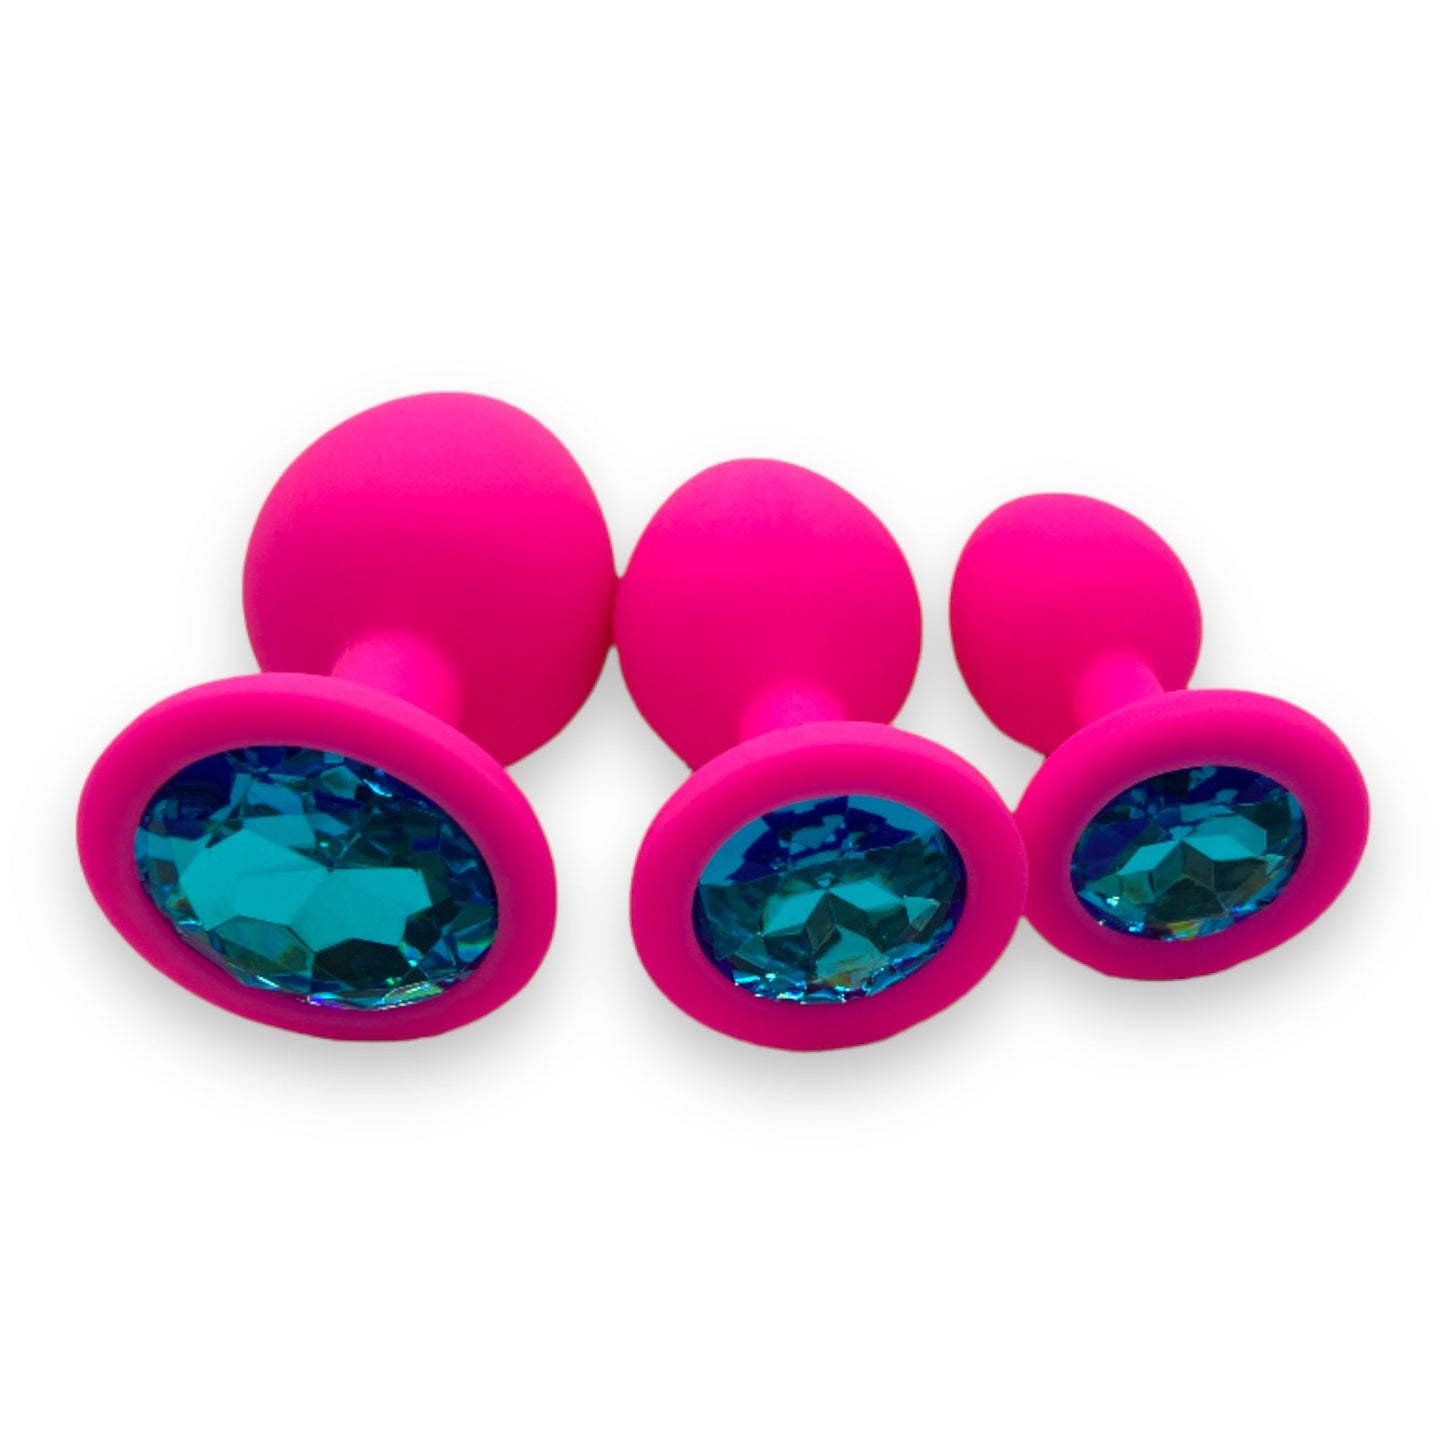 Power Escorts - BR134 - Silicone Butt Plug - Pink - 3 Pack - 6 Colours